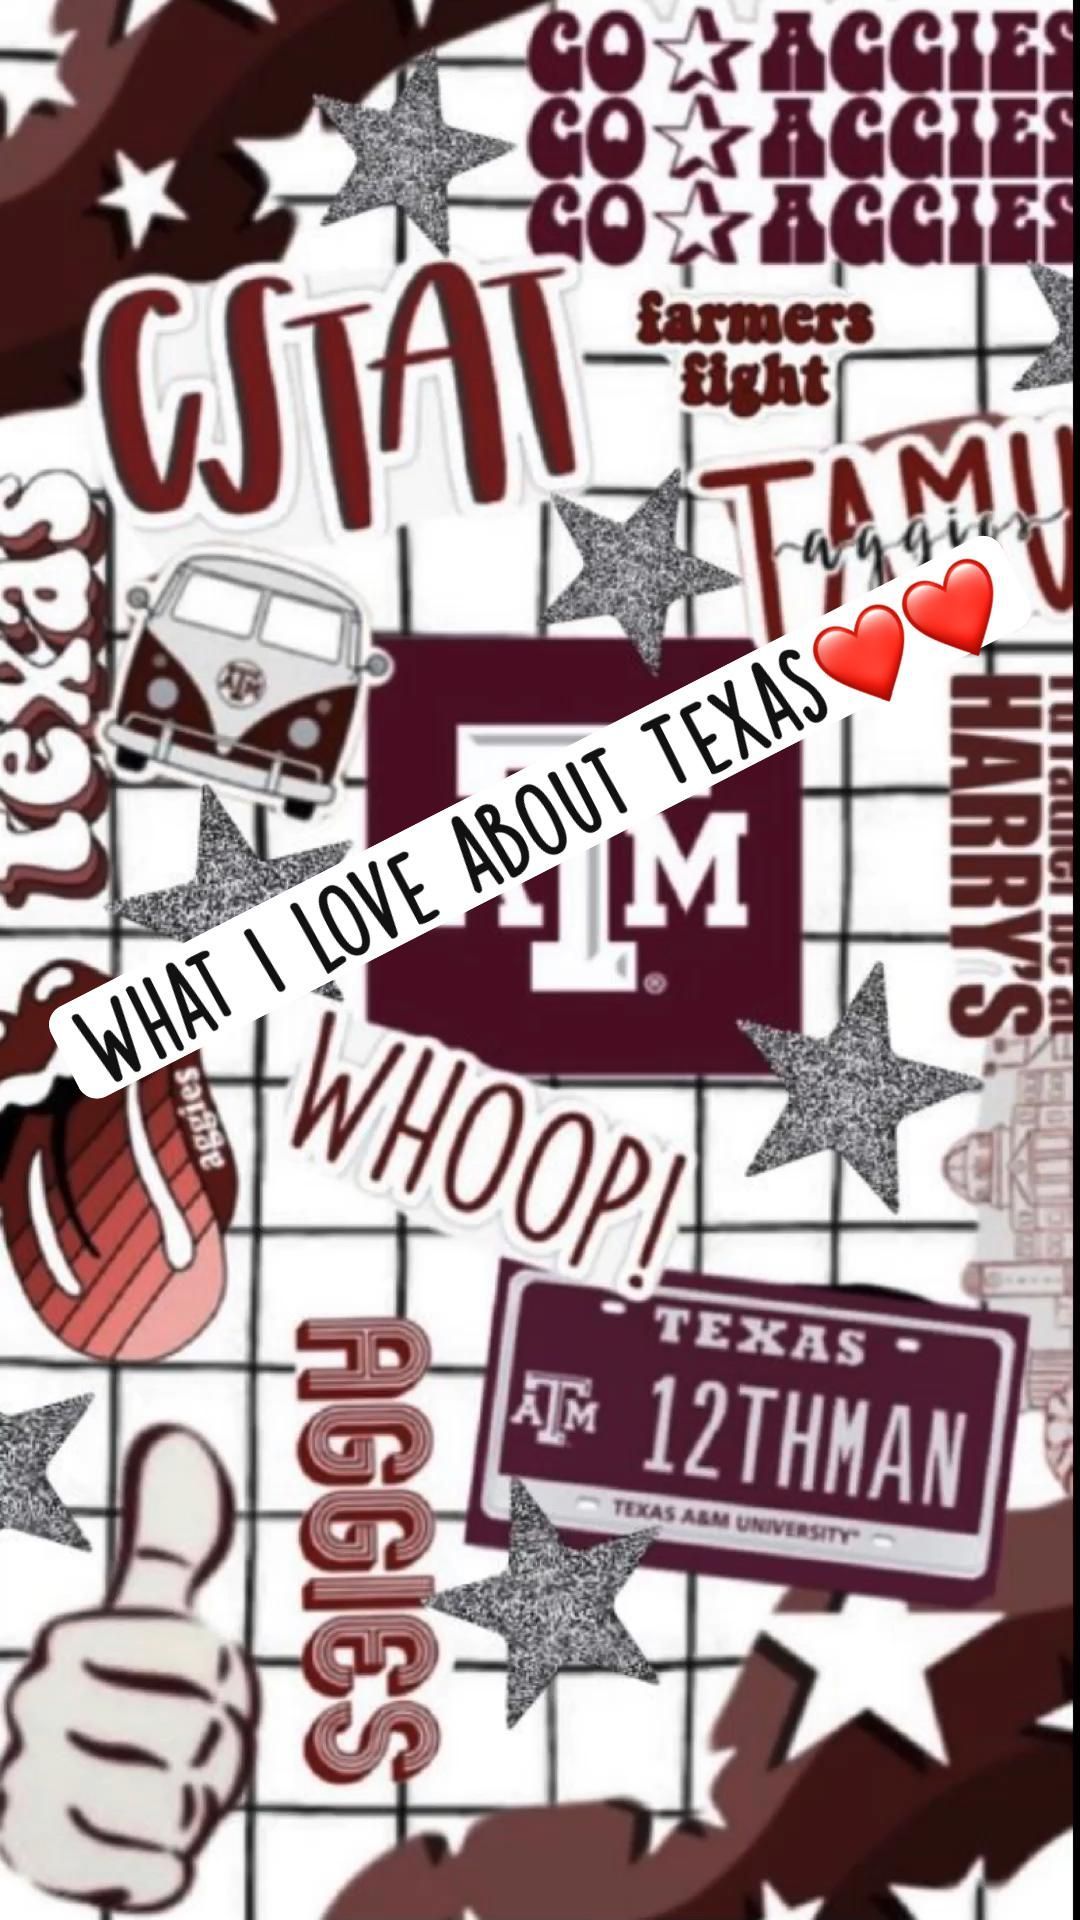 Texas A&M wallpaper I made! If you use it please give credit! - Texas